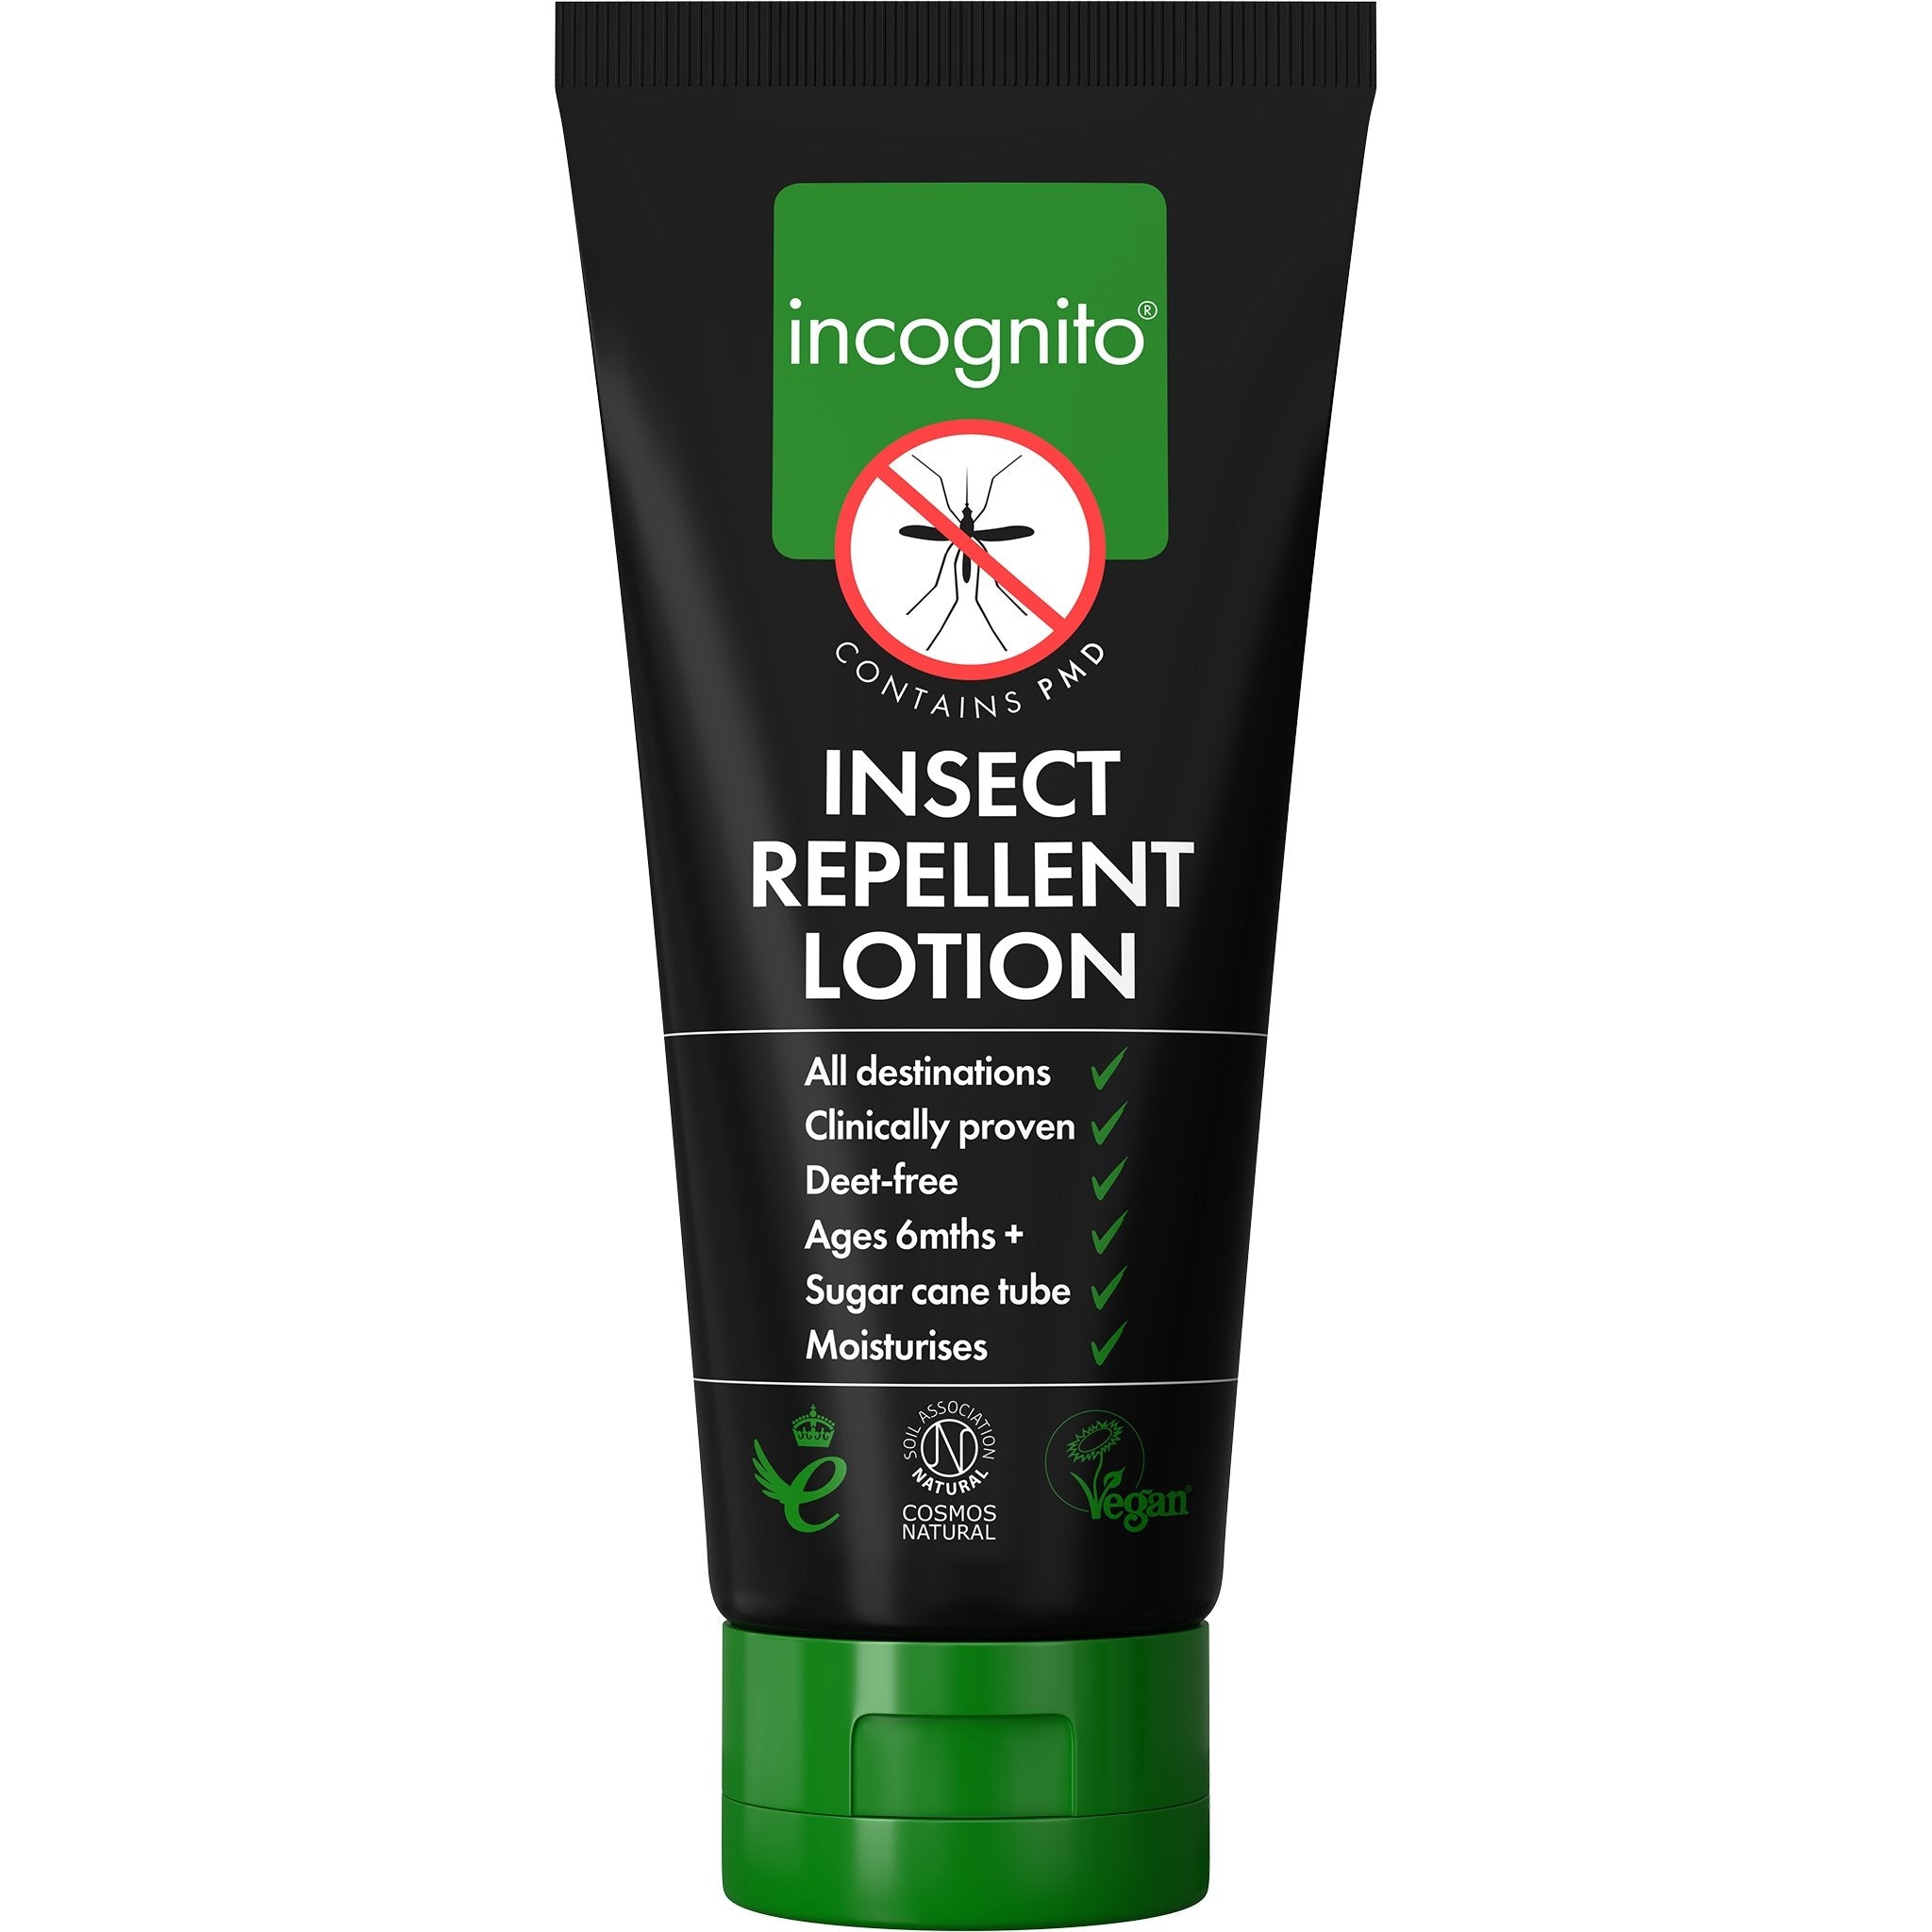 Incognito® Insect Repellent Lotion - mypure.co.uk